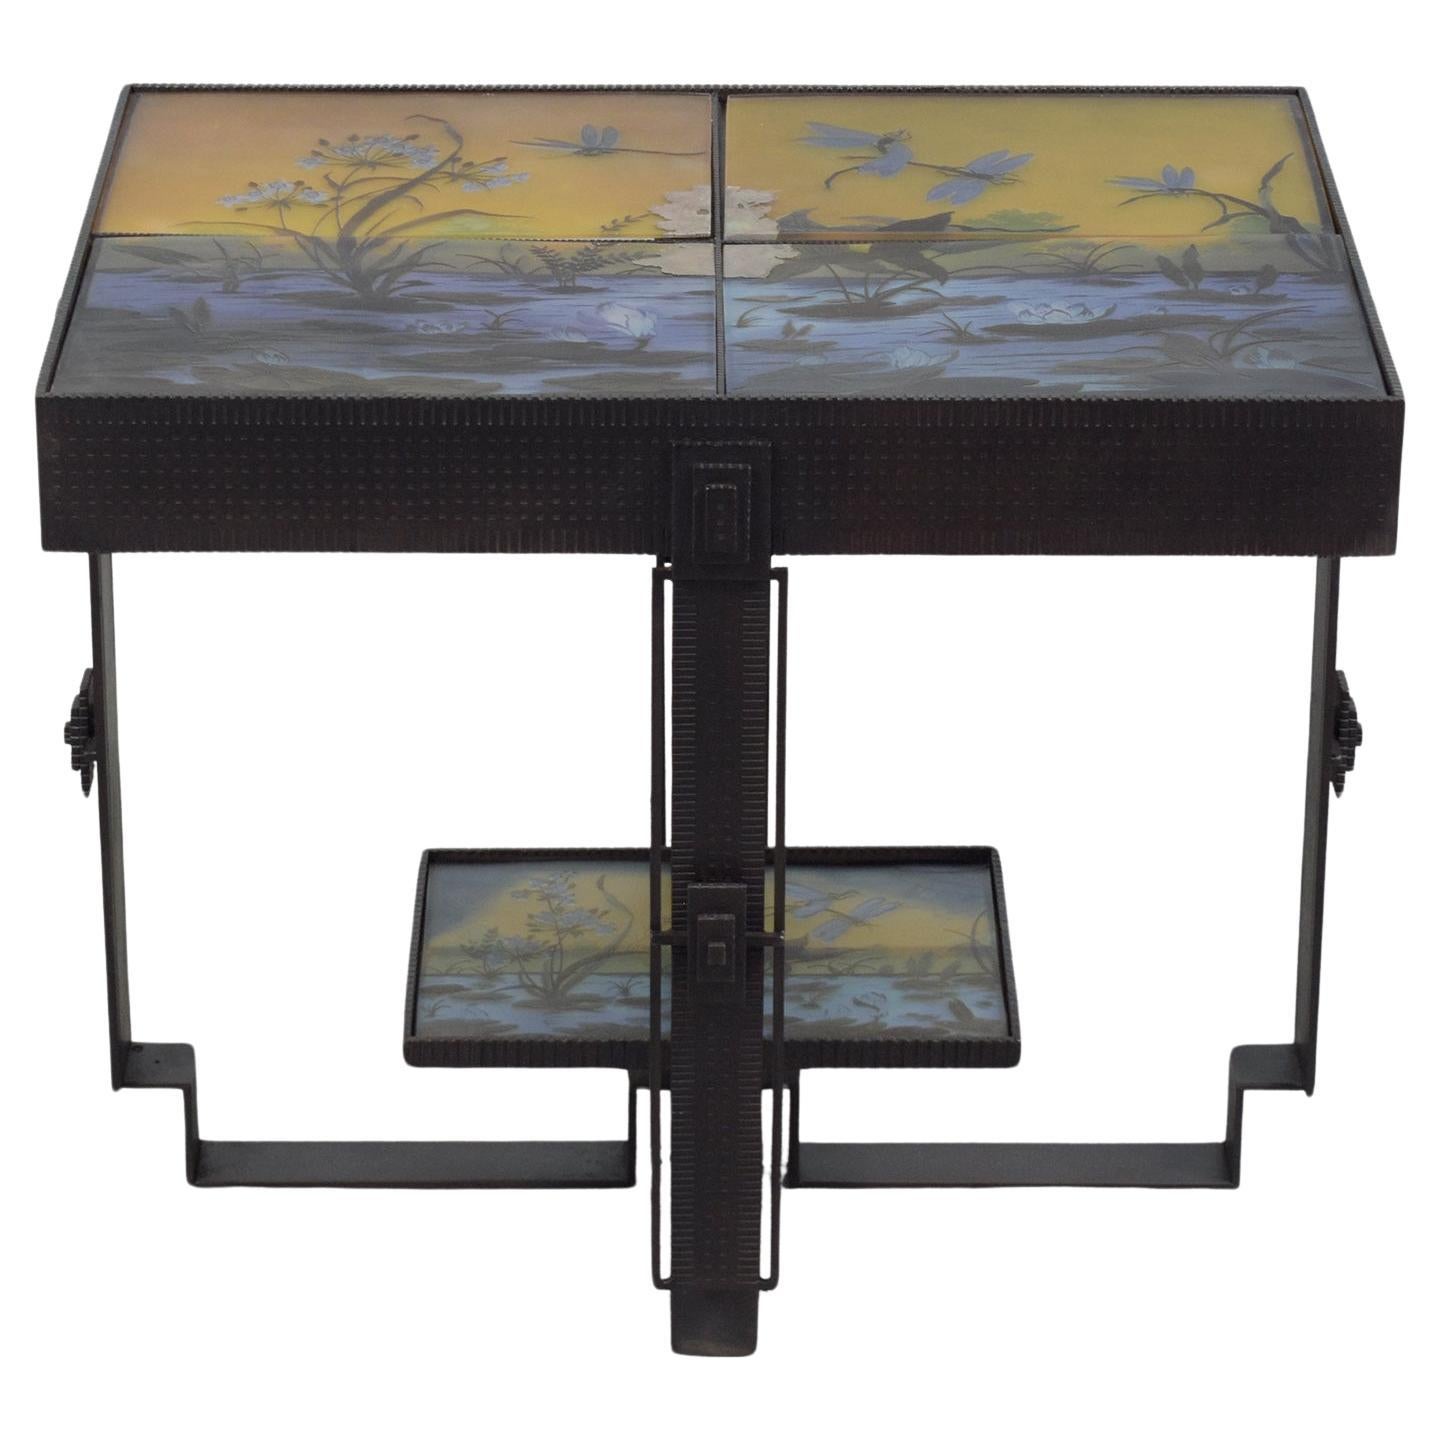 Vintage Art Deco Side Table: 1970s Iron & Glass Masterpiece For Sale